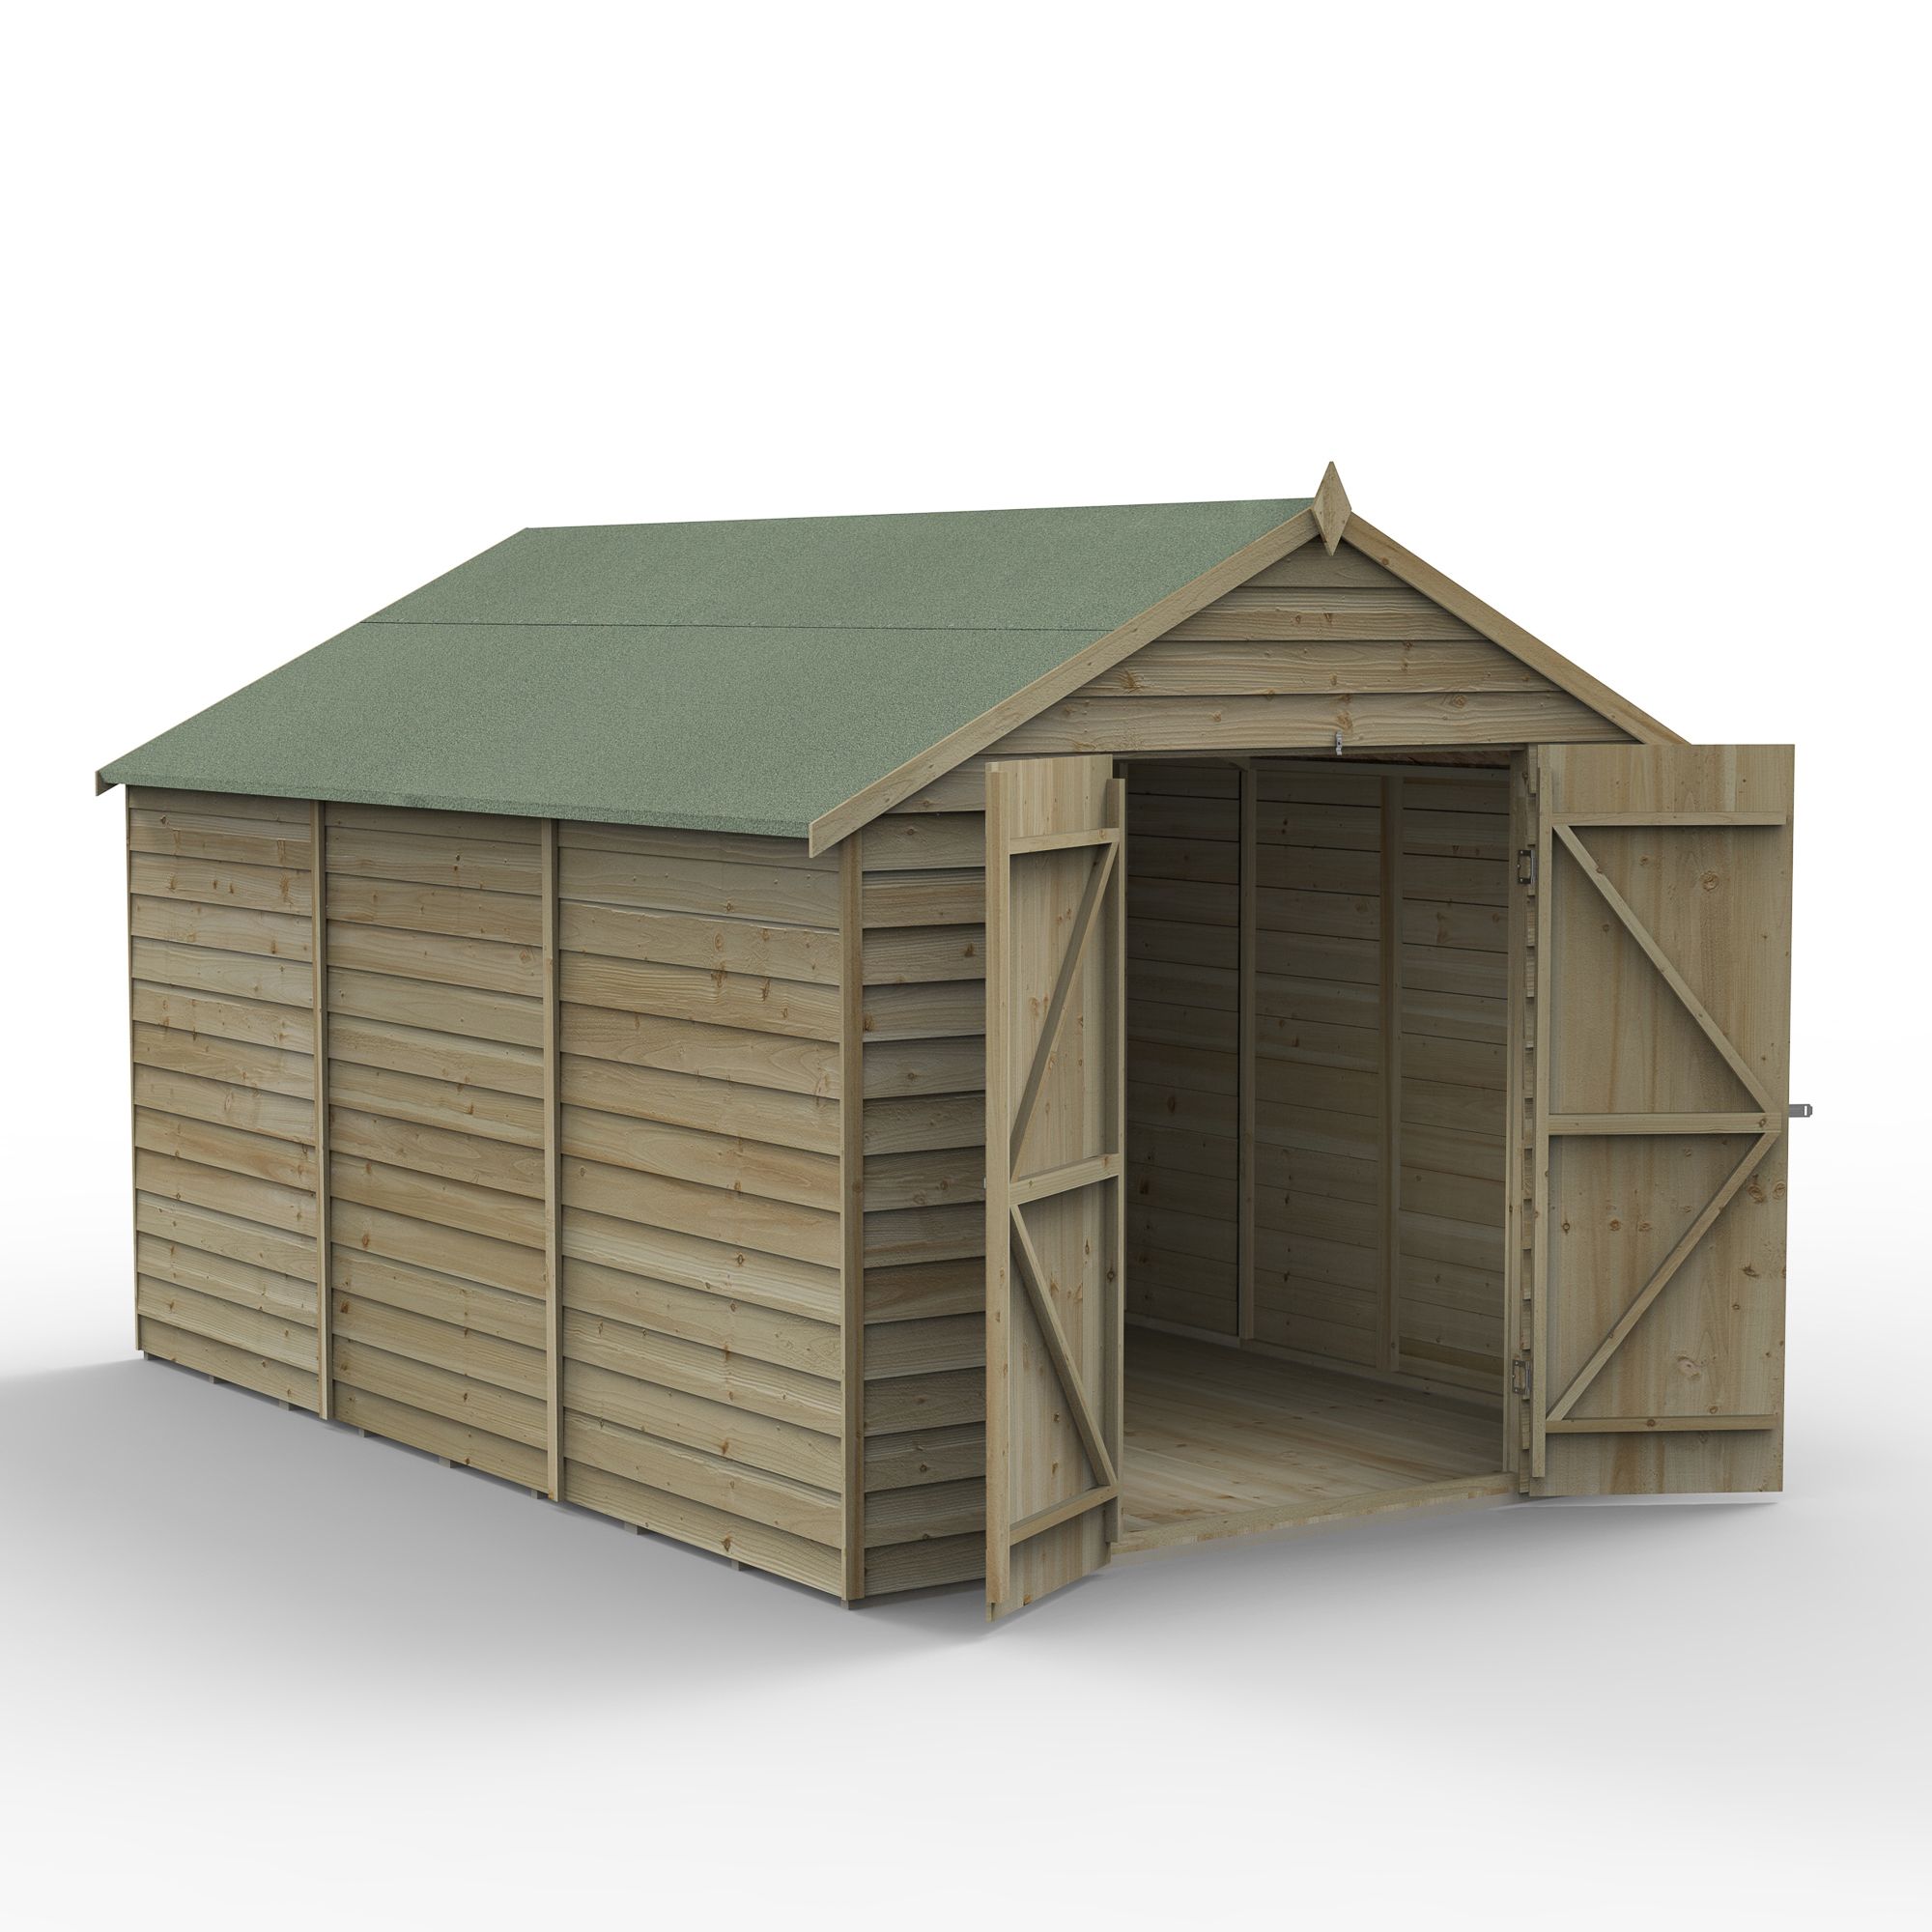 Forest Garden 12x8 ft Apex Wooden 2 door Shed with floor (Base included)